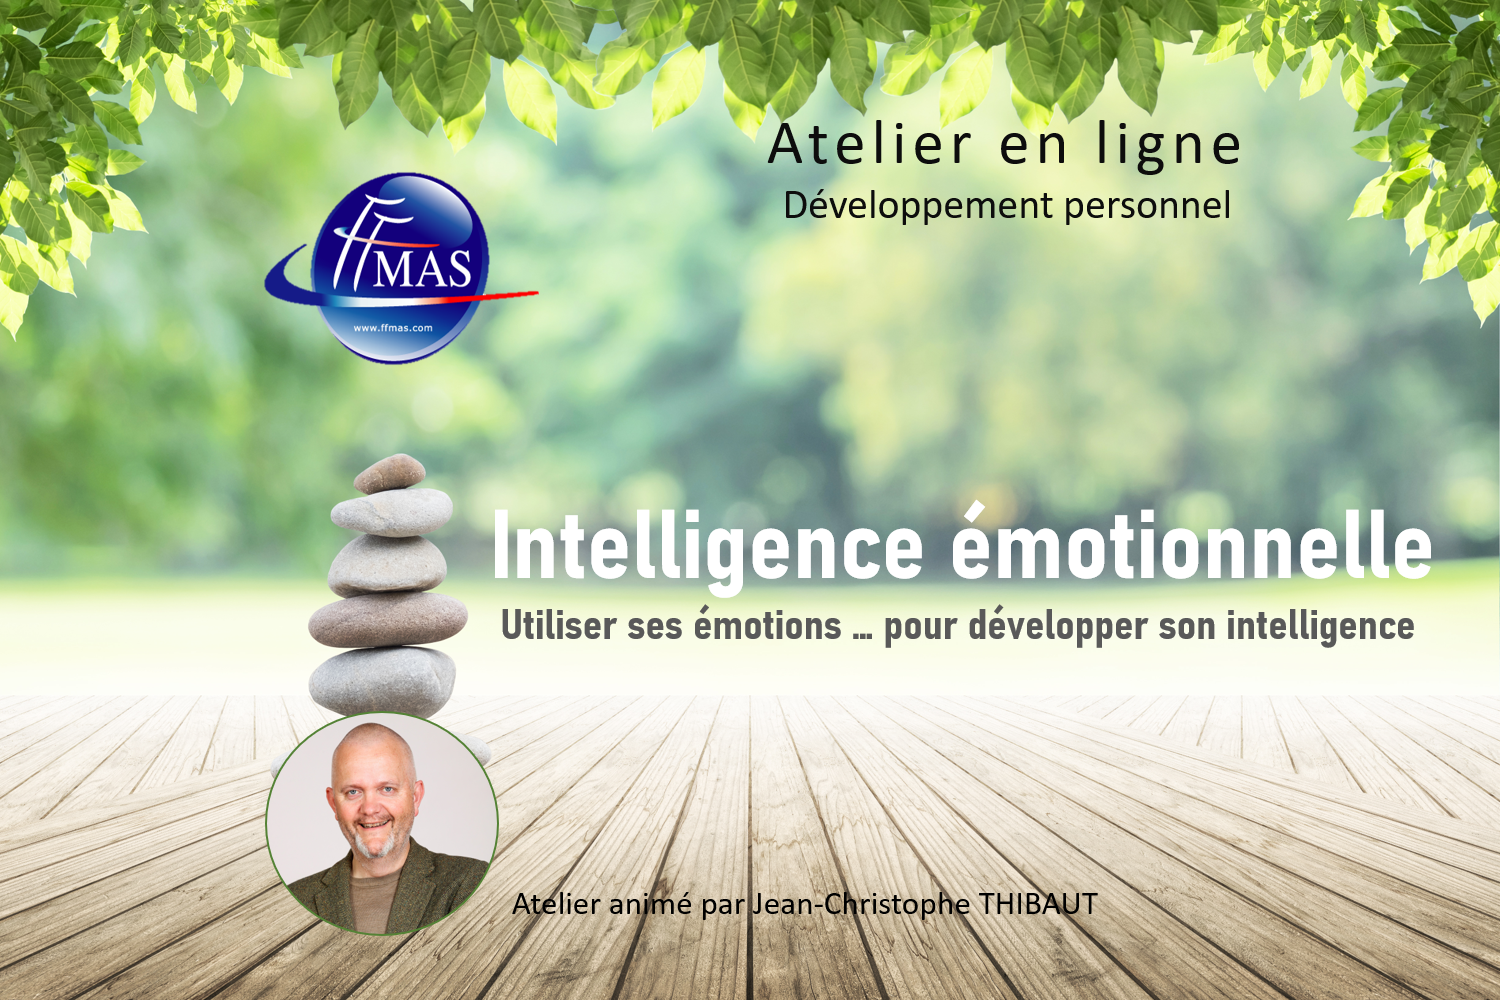 You are currently viewing Atelier en ligne | L’intelligence Emotionnelle